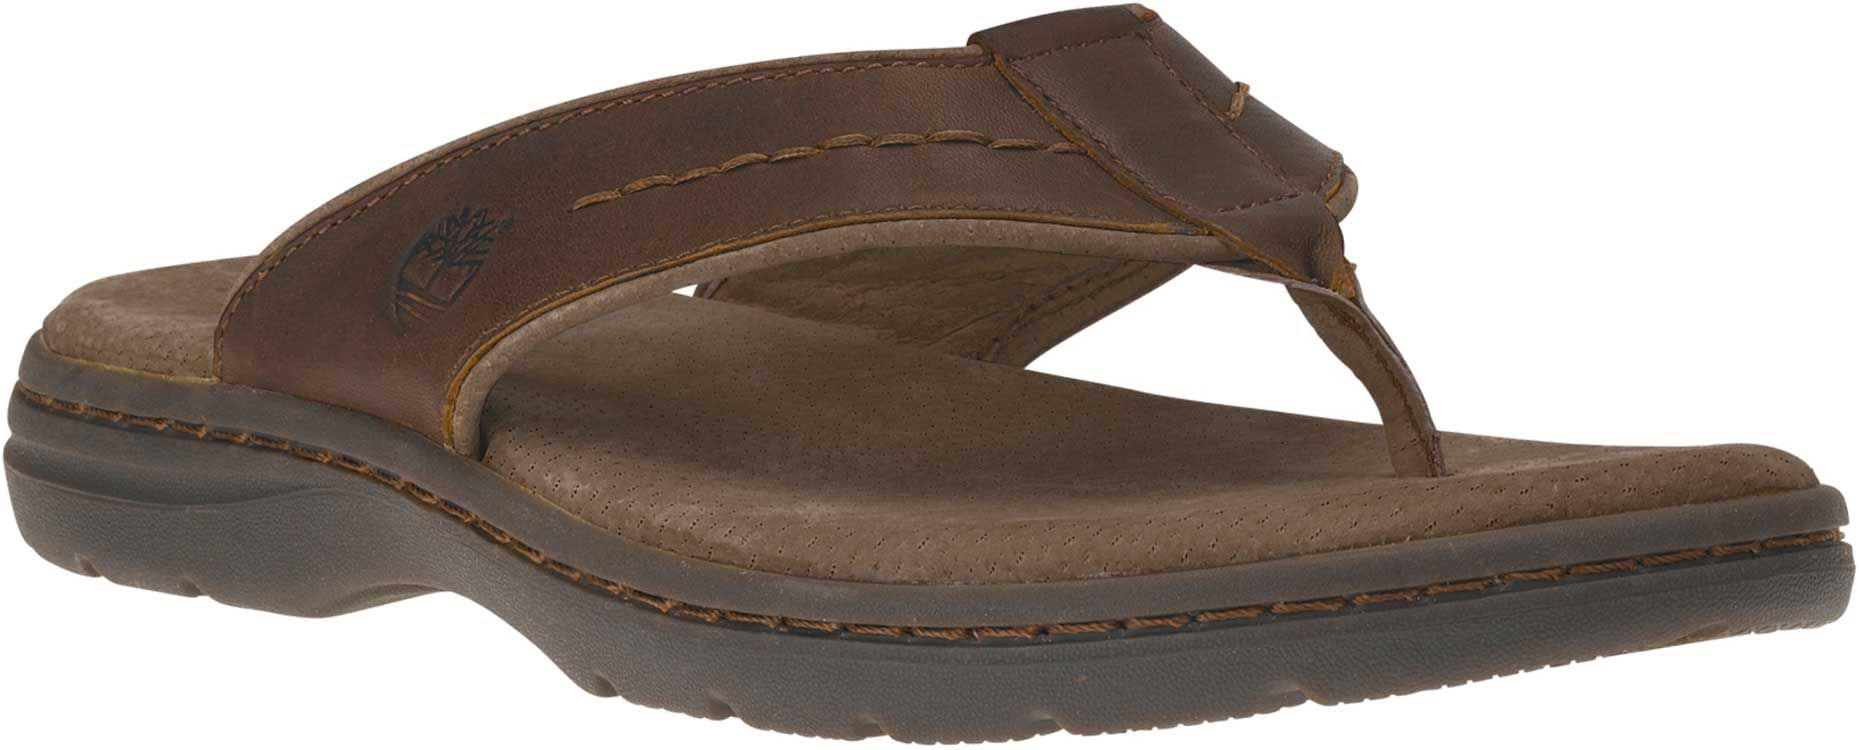 timberland earthkeepers slippers